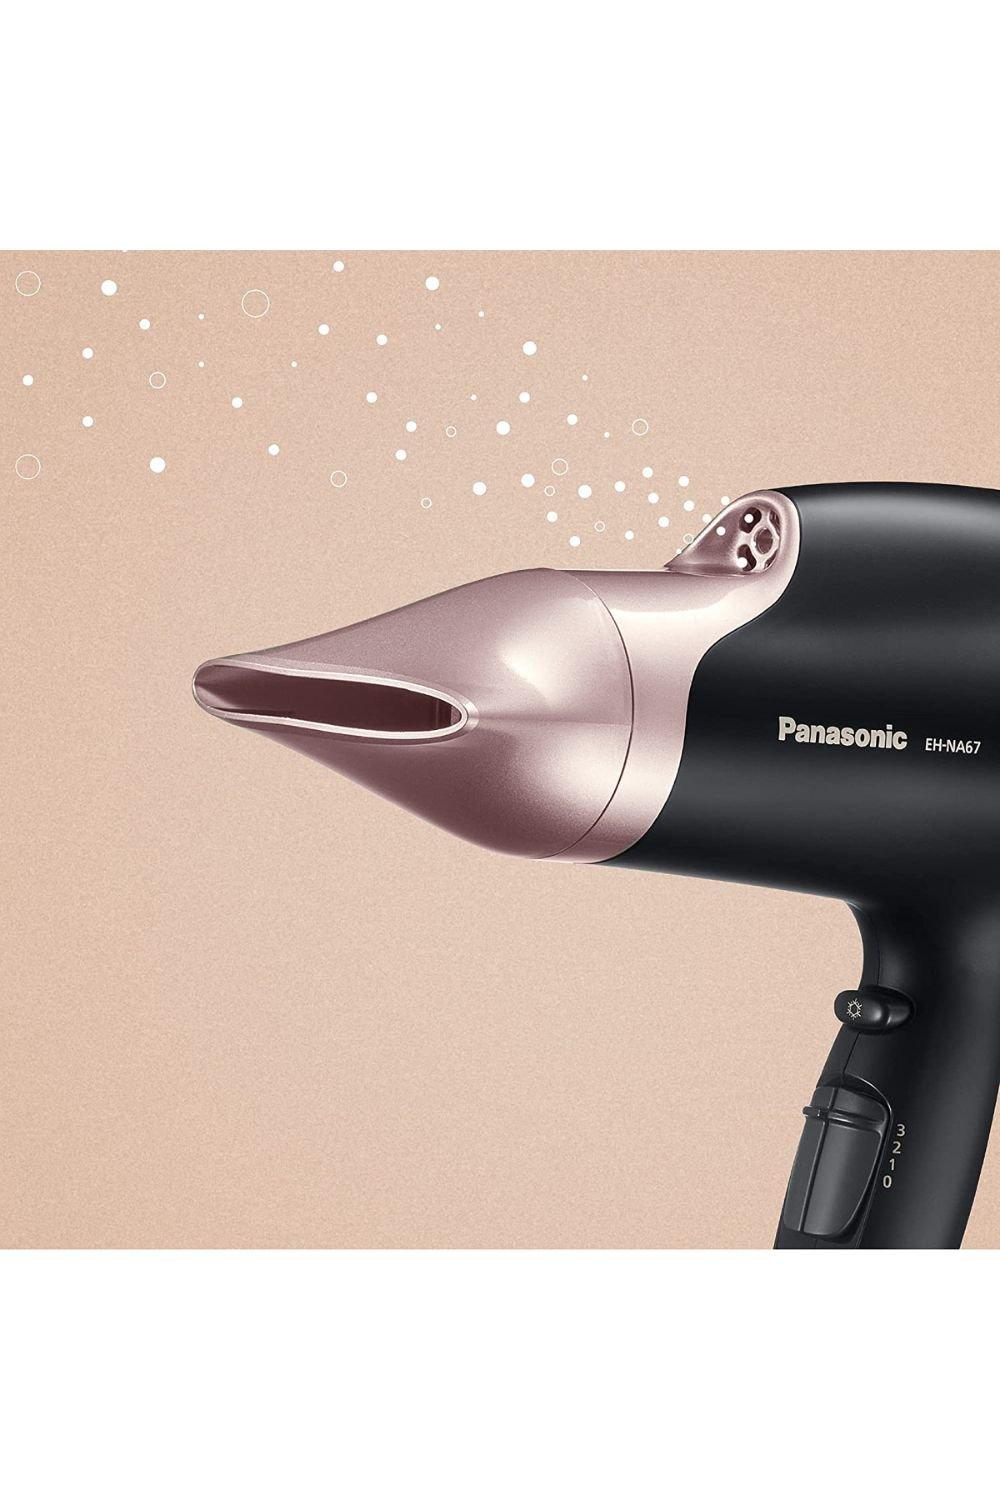 Dryer Panasonic Styling Protection Gold) | (Pink Oscillating and for EH-NA67 | Hair with Nozzle Scalp nanoe Hair Diffuser Tools